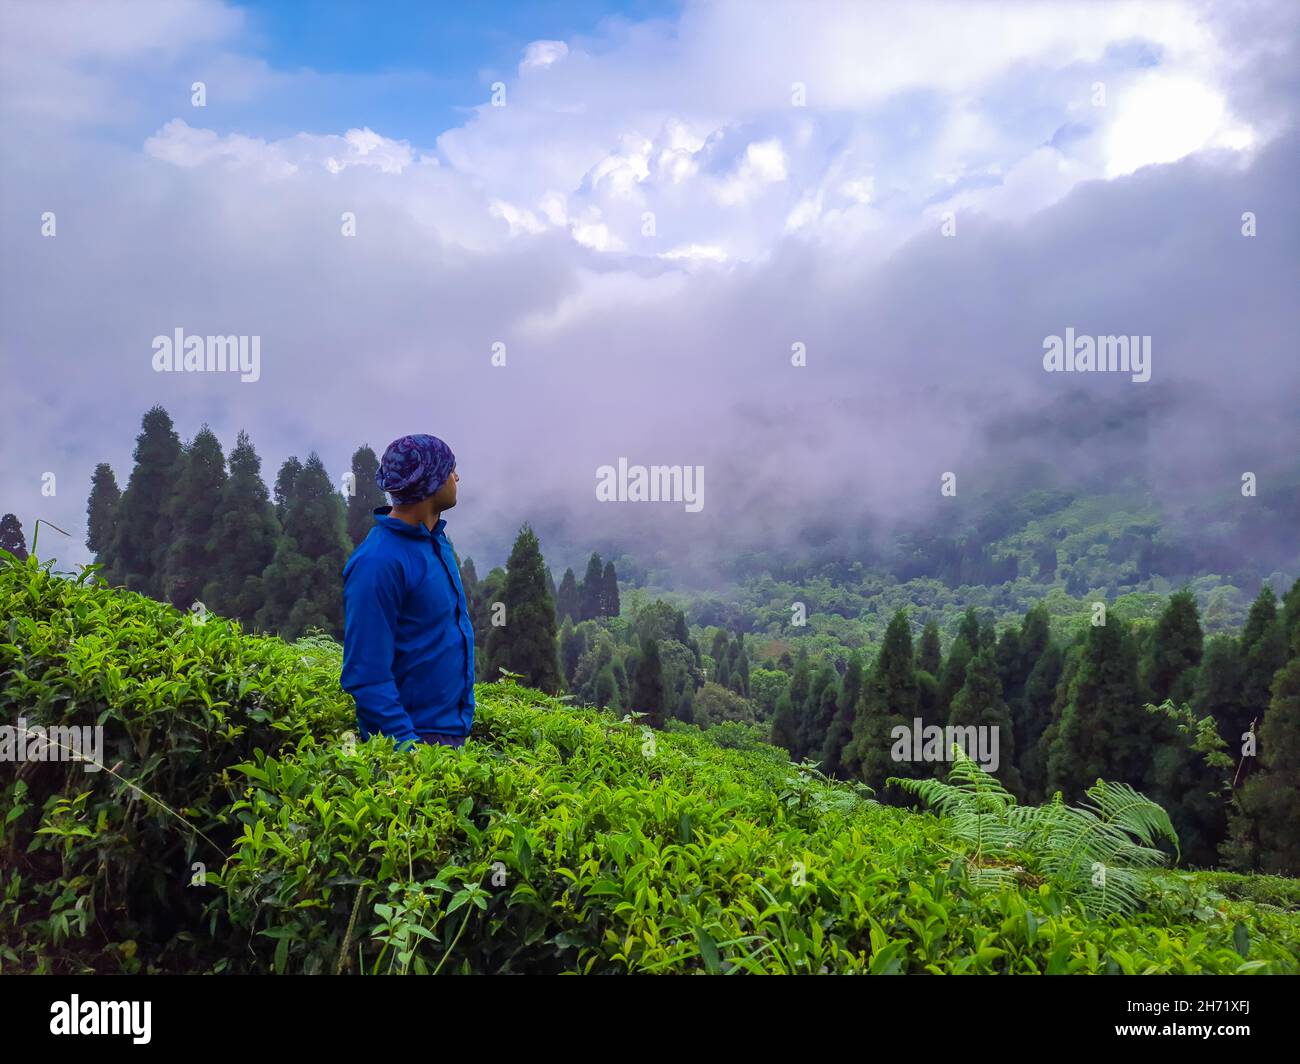 young man at tea garden with mountain background and bright sky at morning image is taken at darjeeling west bengal india. Stock Photo